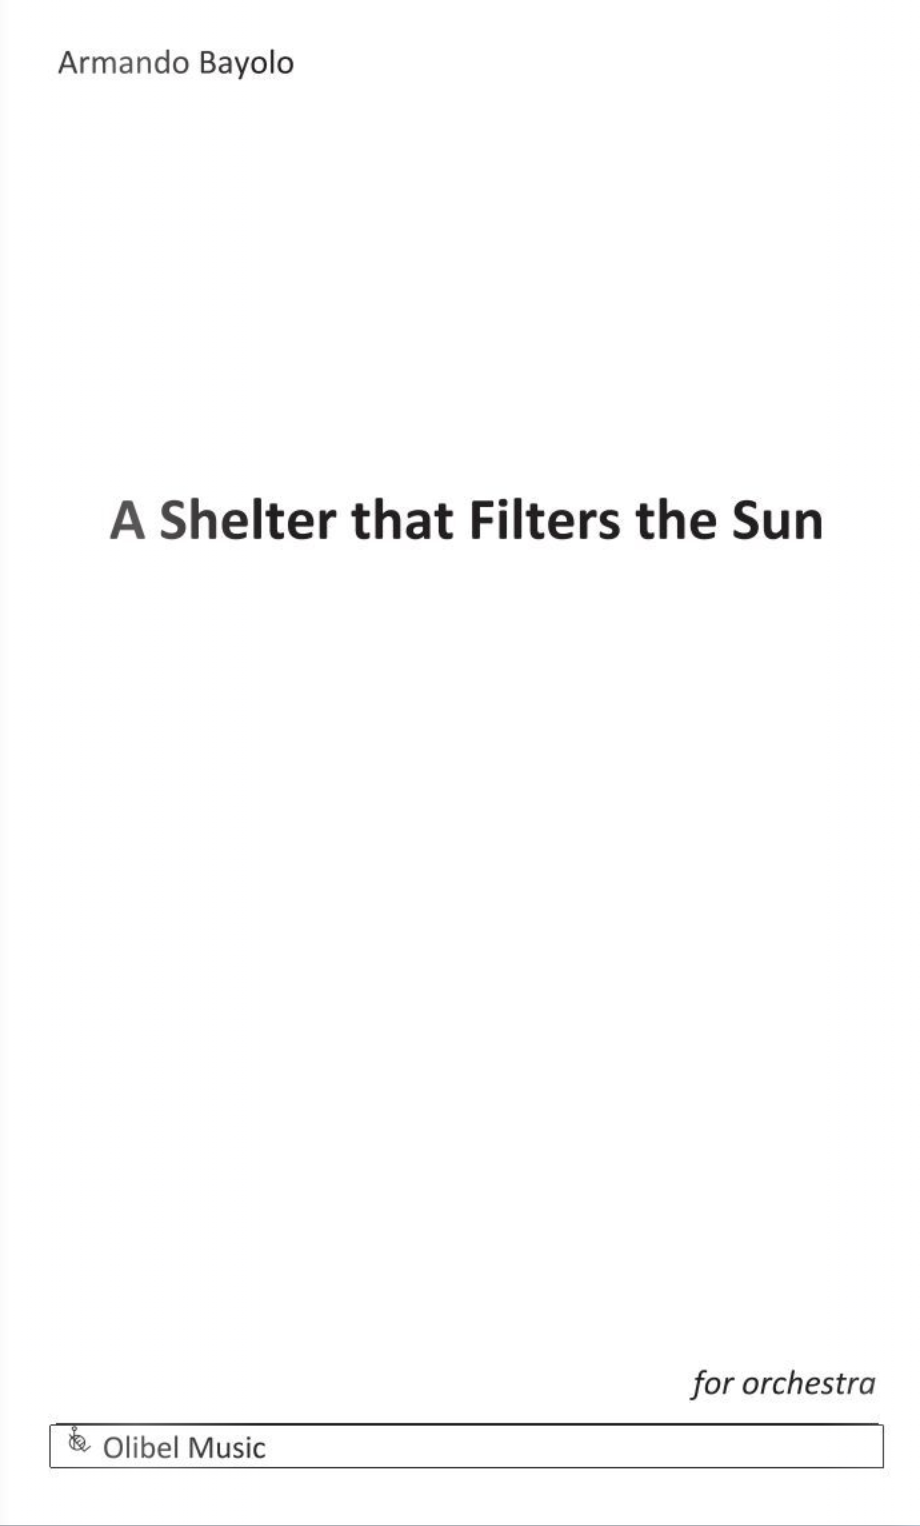 A Shelter That Filters The Sun by Armando Bayolo